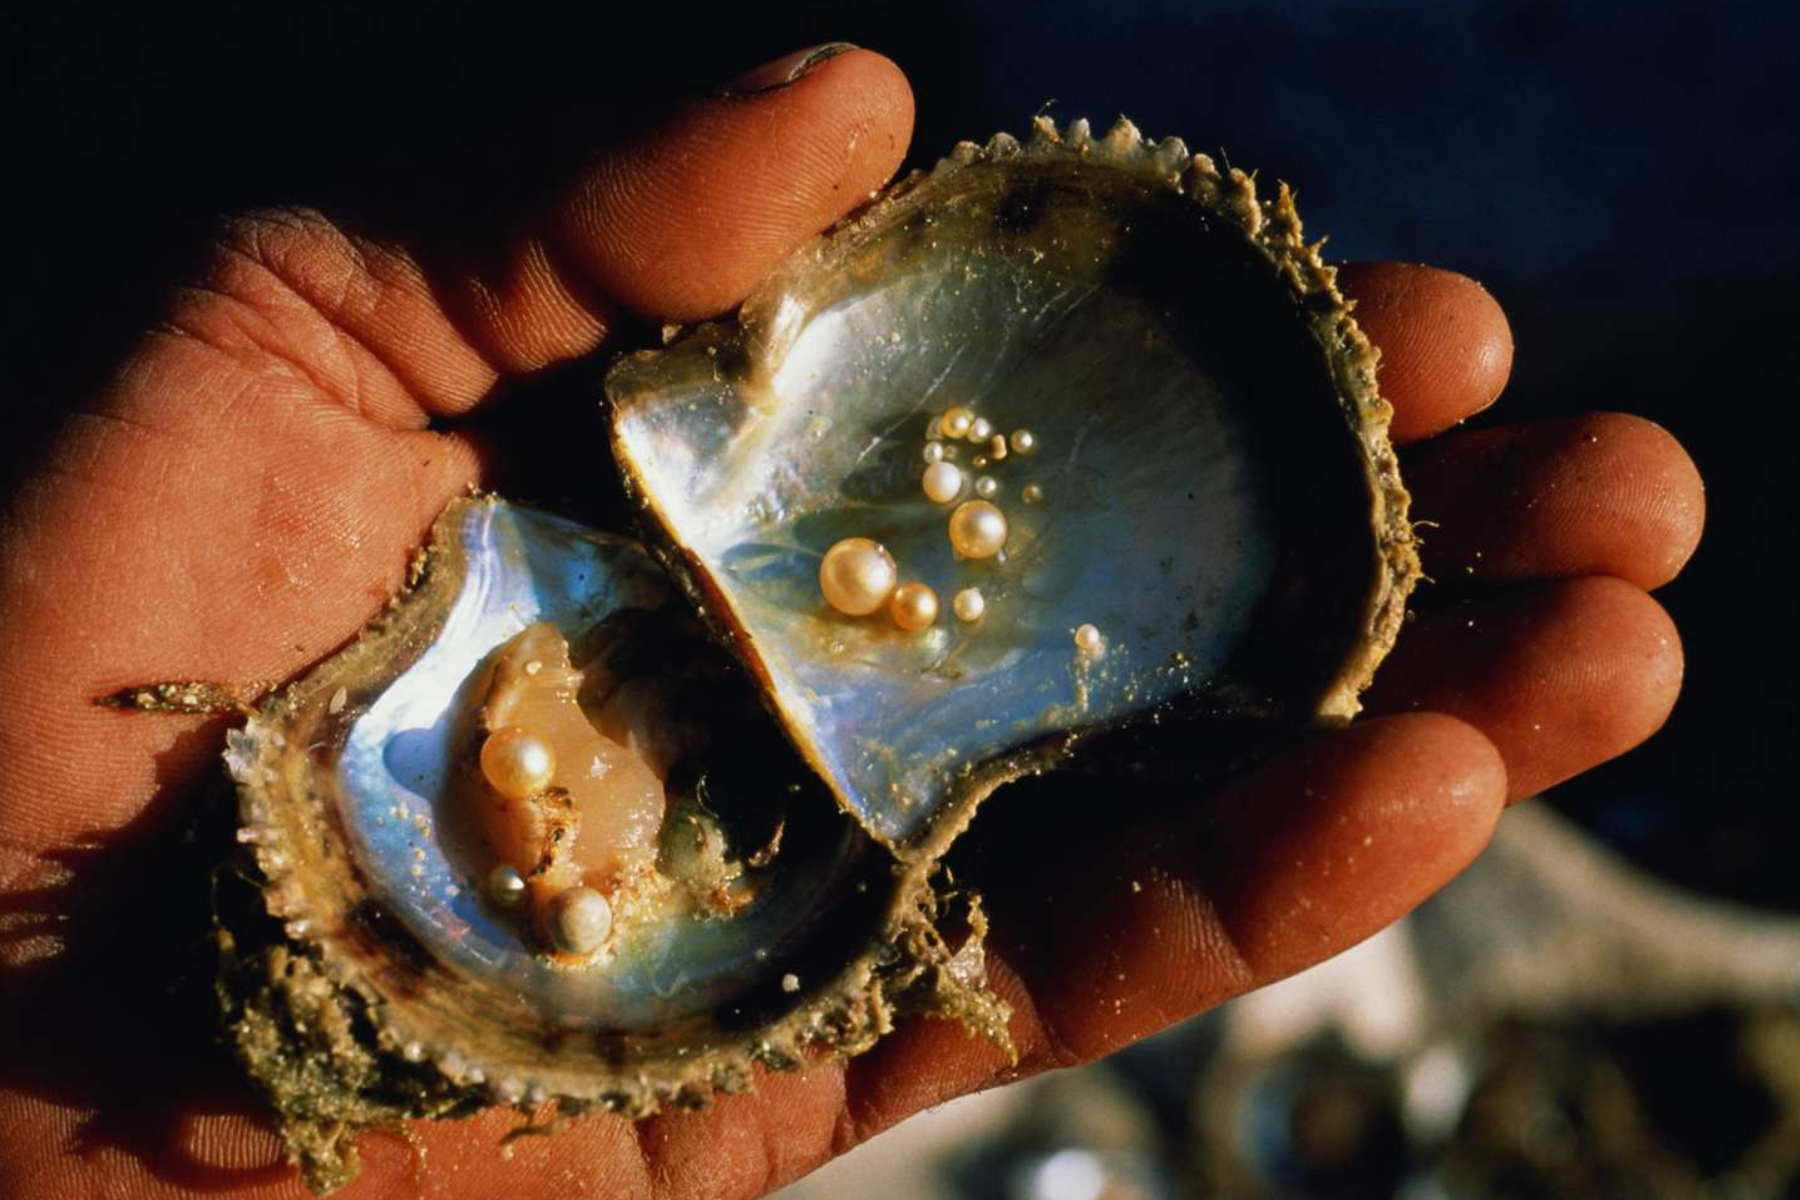 A man's hand holding an oyster encrusted with pearls